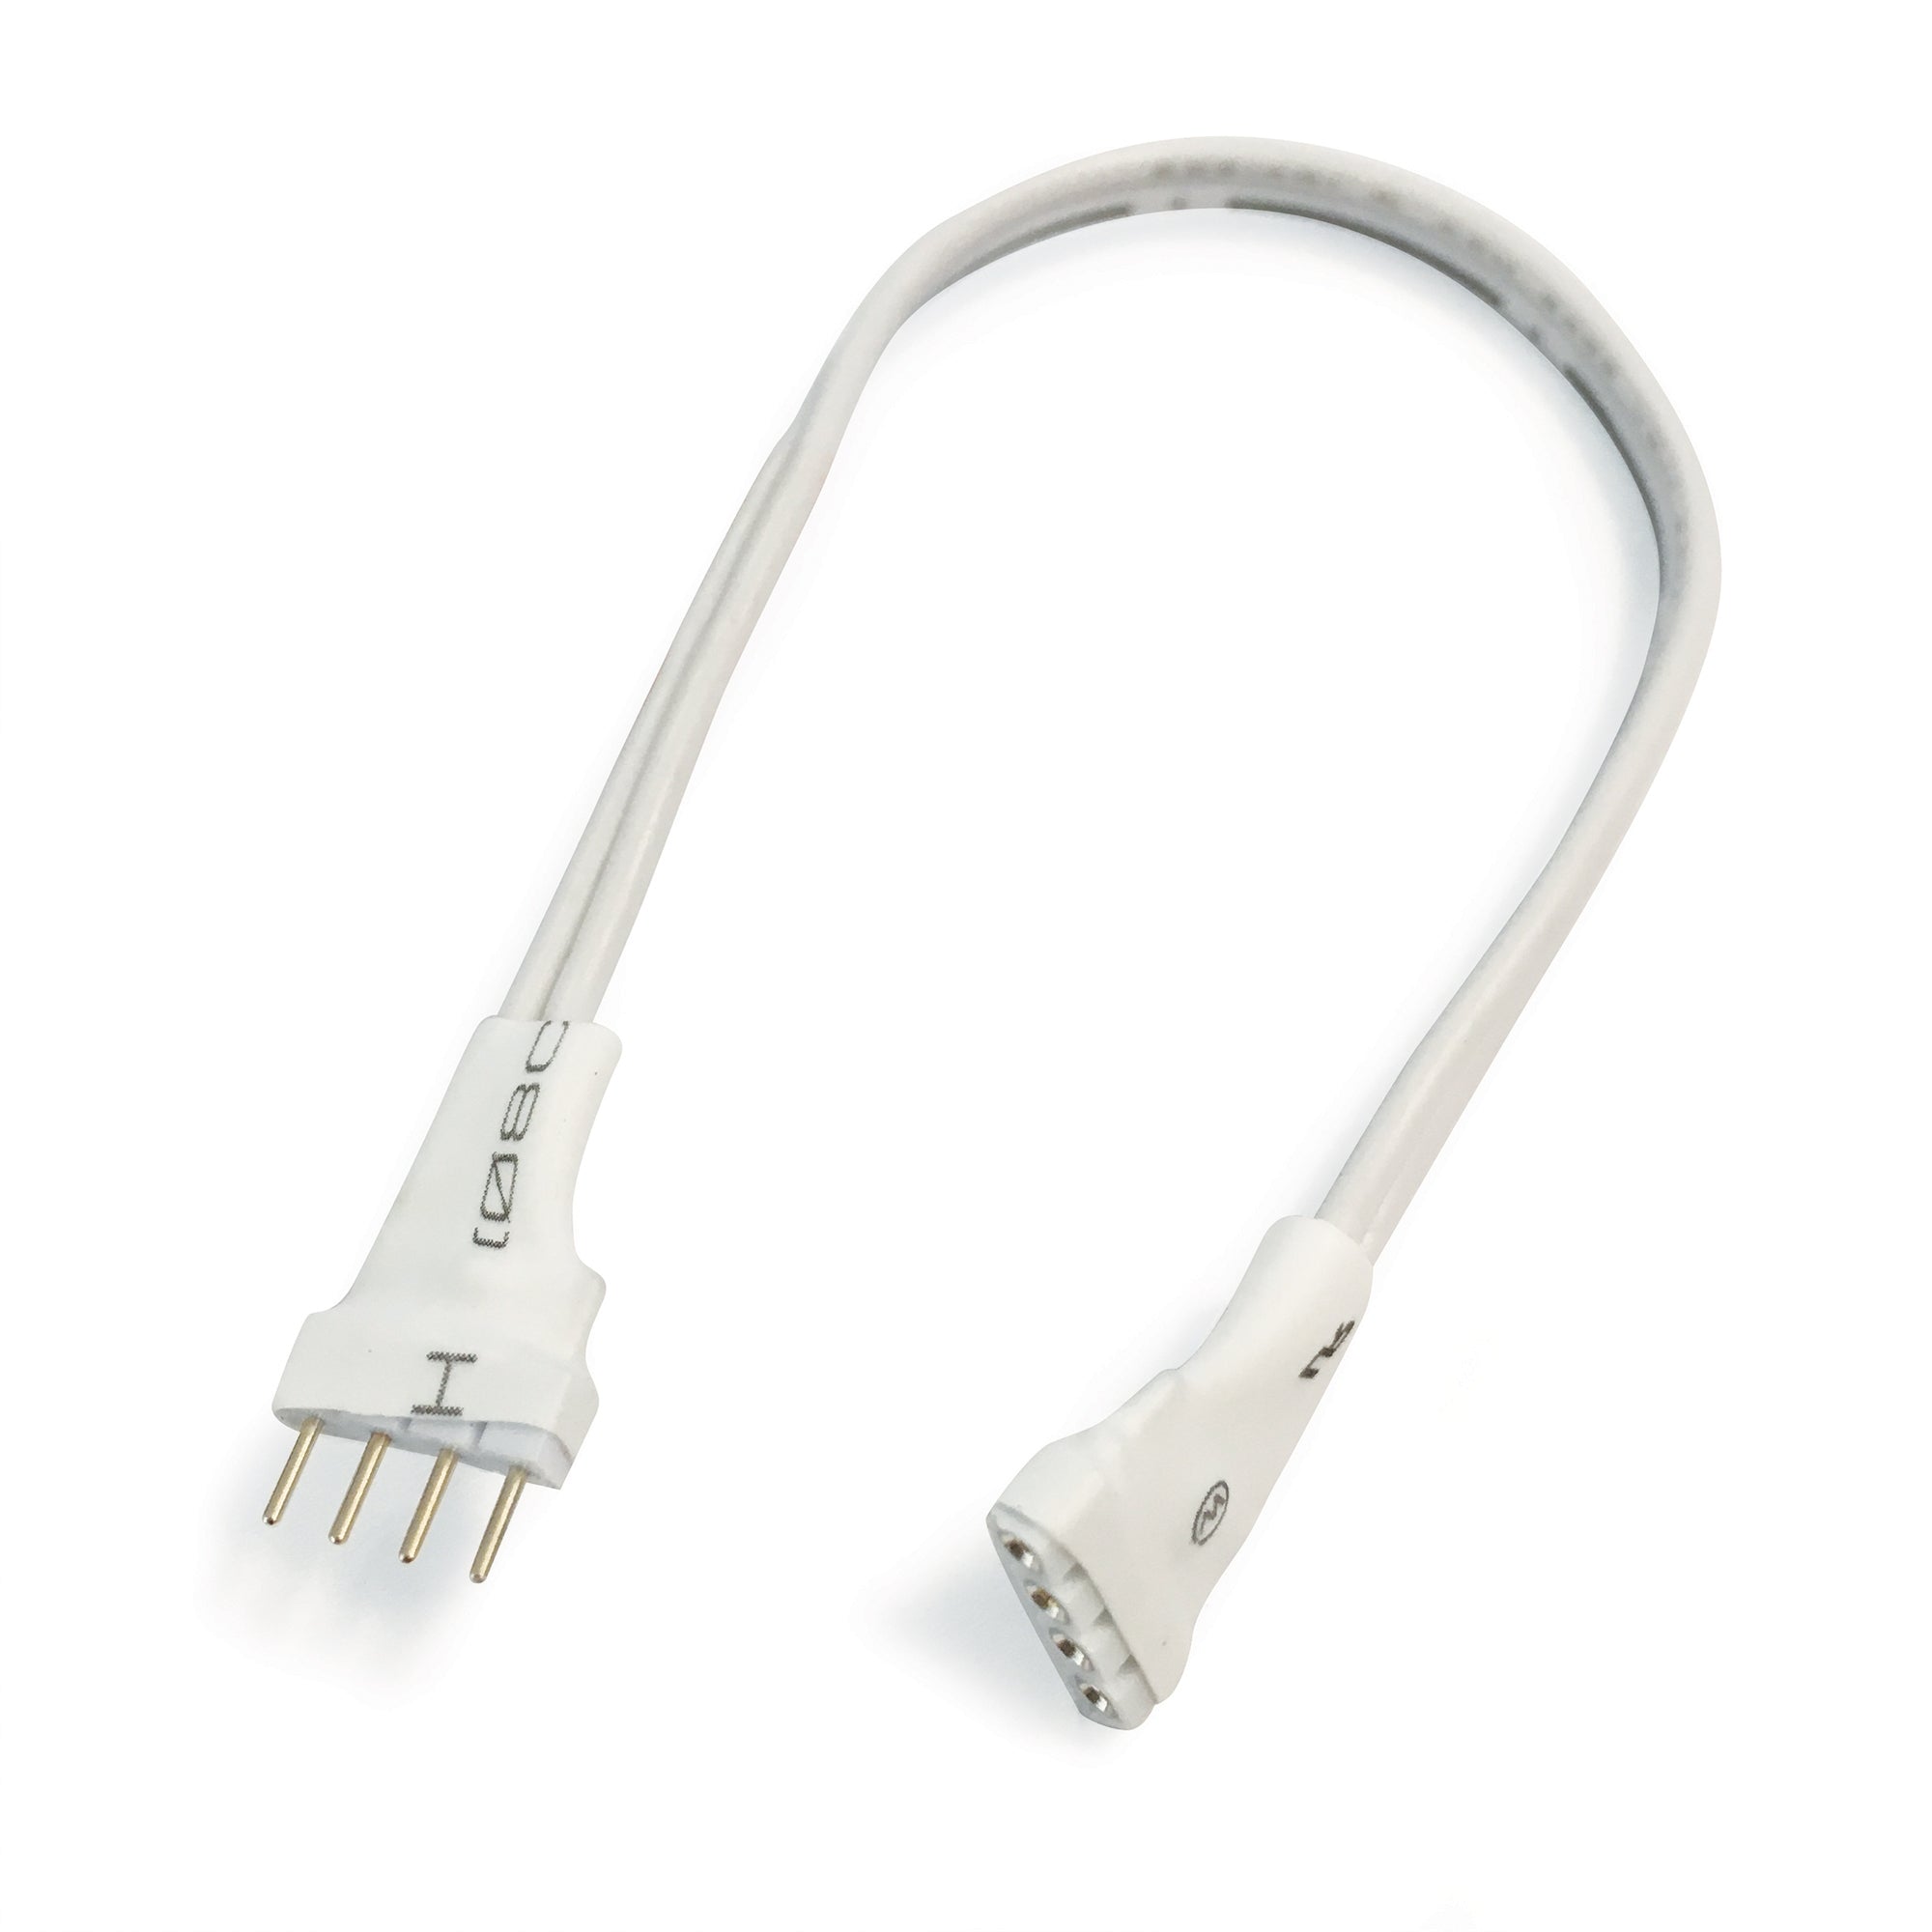 Nora Lighting NARGBW-936W 36" Interconnection Cable For RGBW Tape Light - White